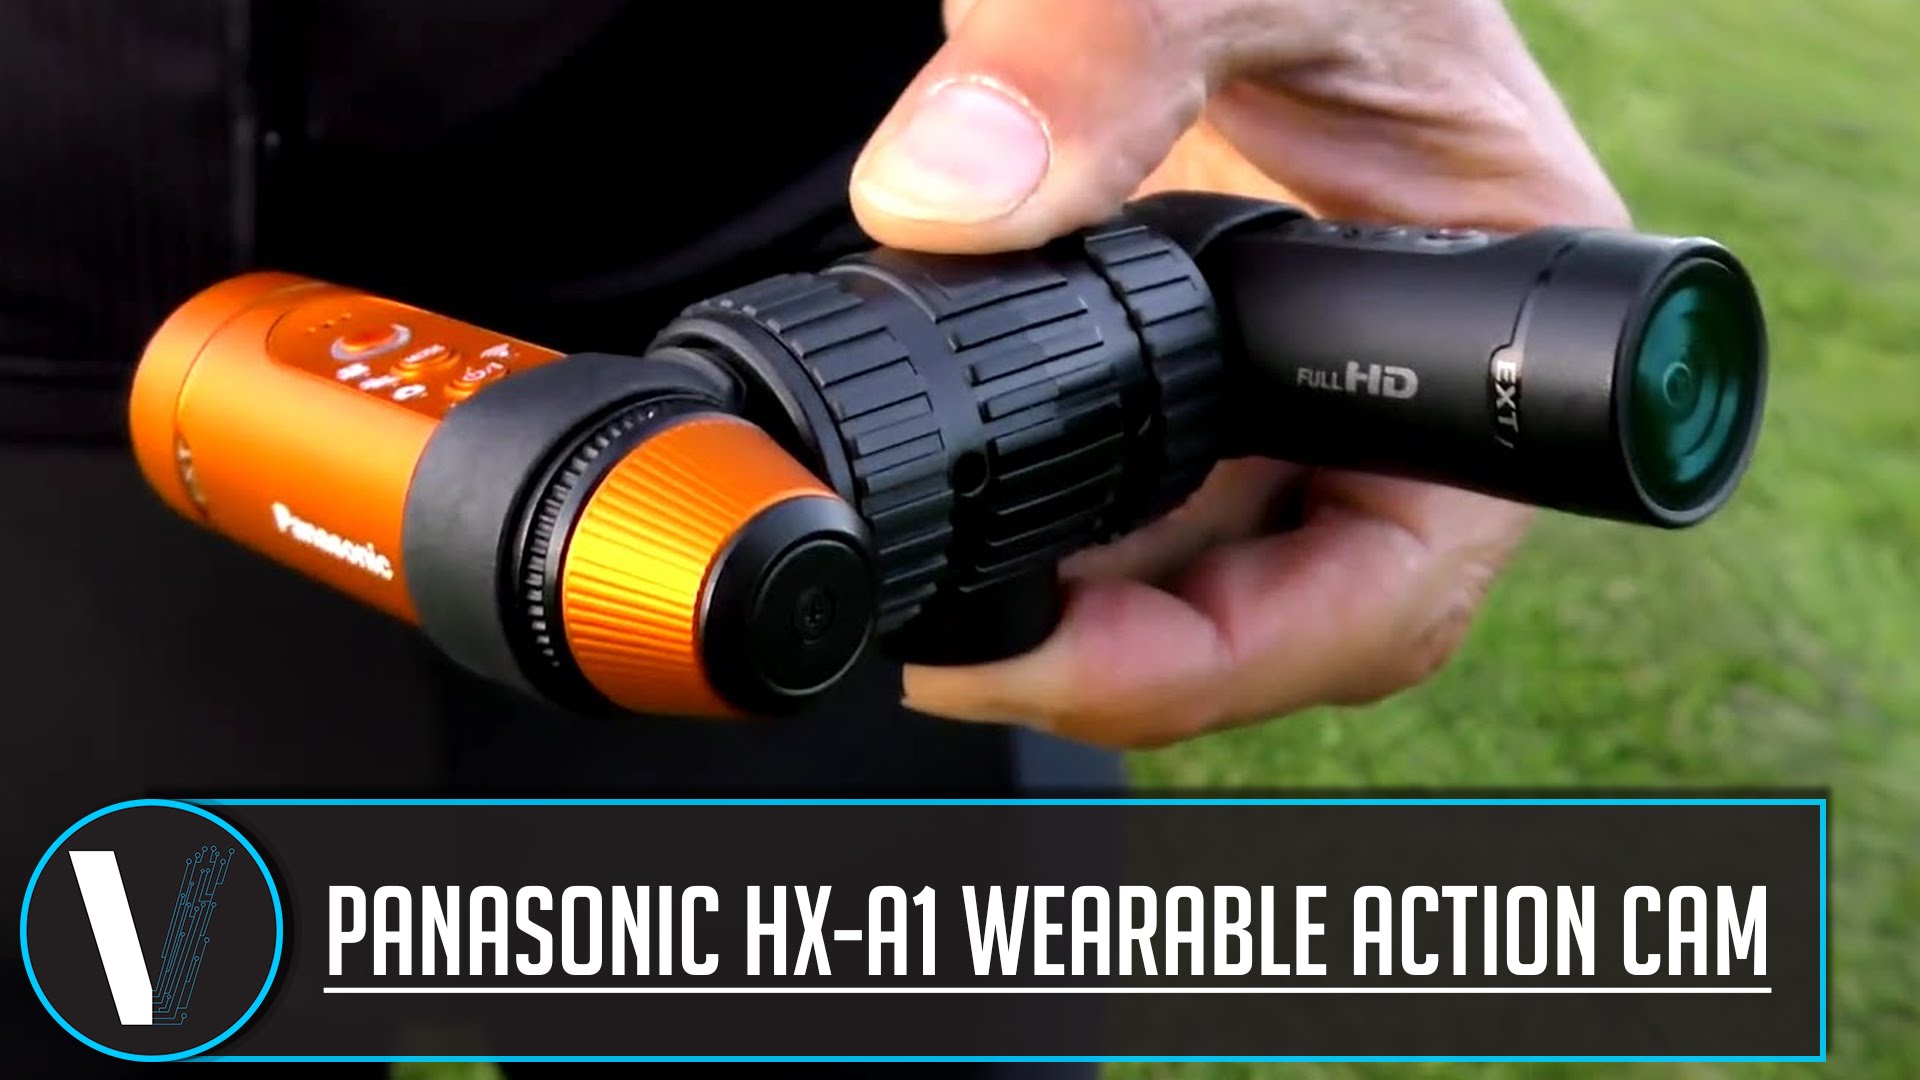 Panasonic HX-A1 Wearable Action Cam Review